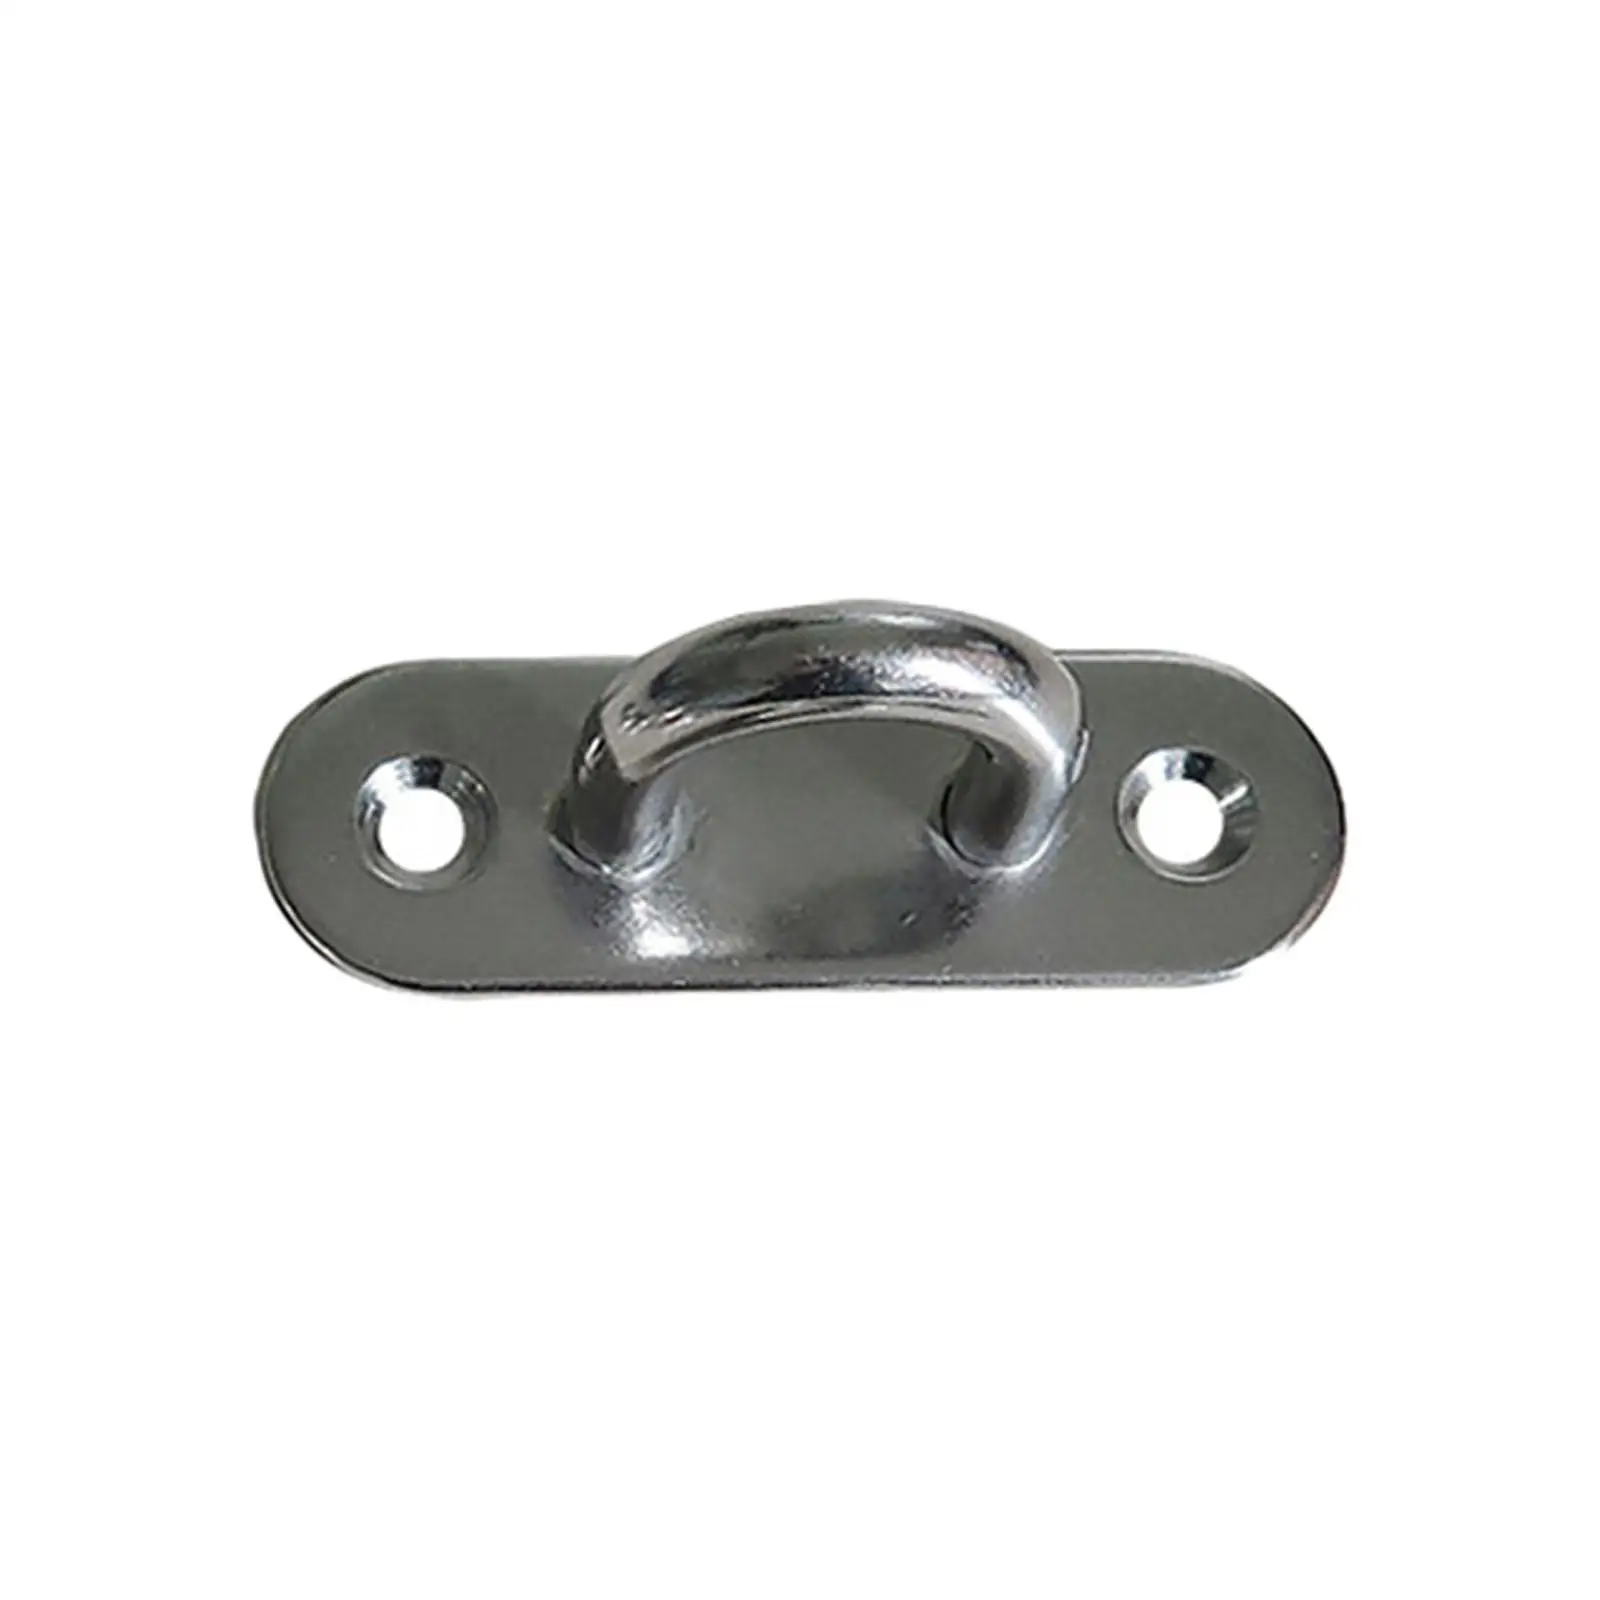 Horse Tie Ring Prevent Horses from Pulling Back Quick Snap Stainless Steel with Eye Bolt Hooks Equestrian Safety Accessories